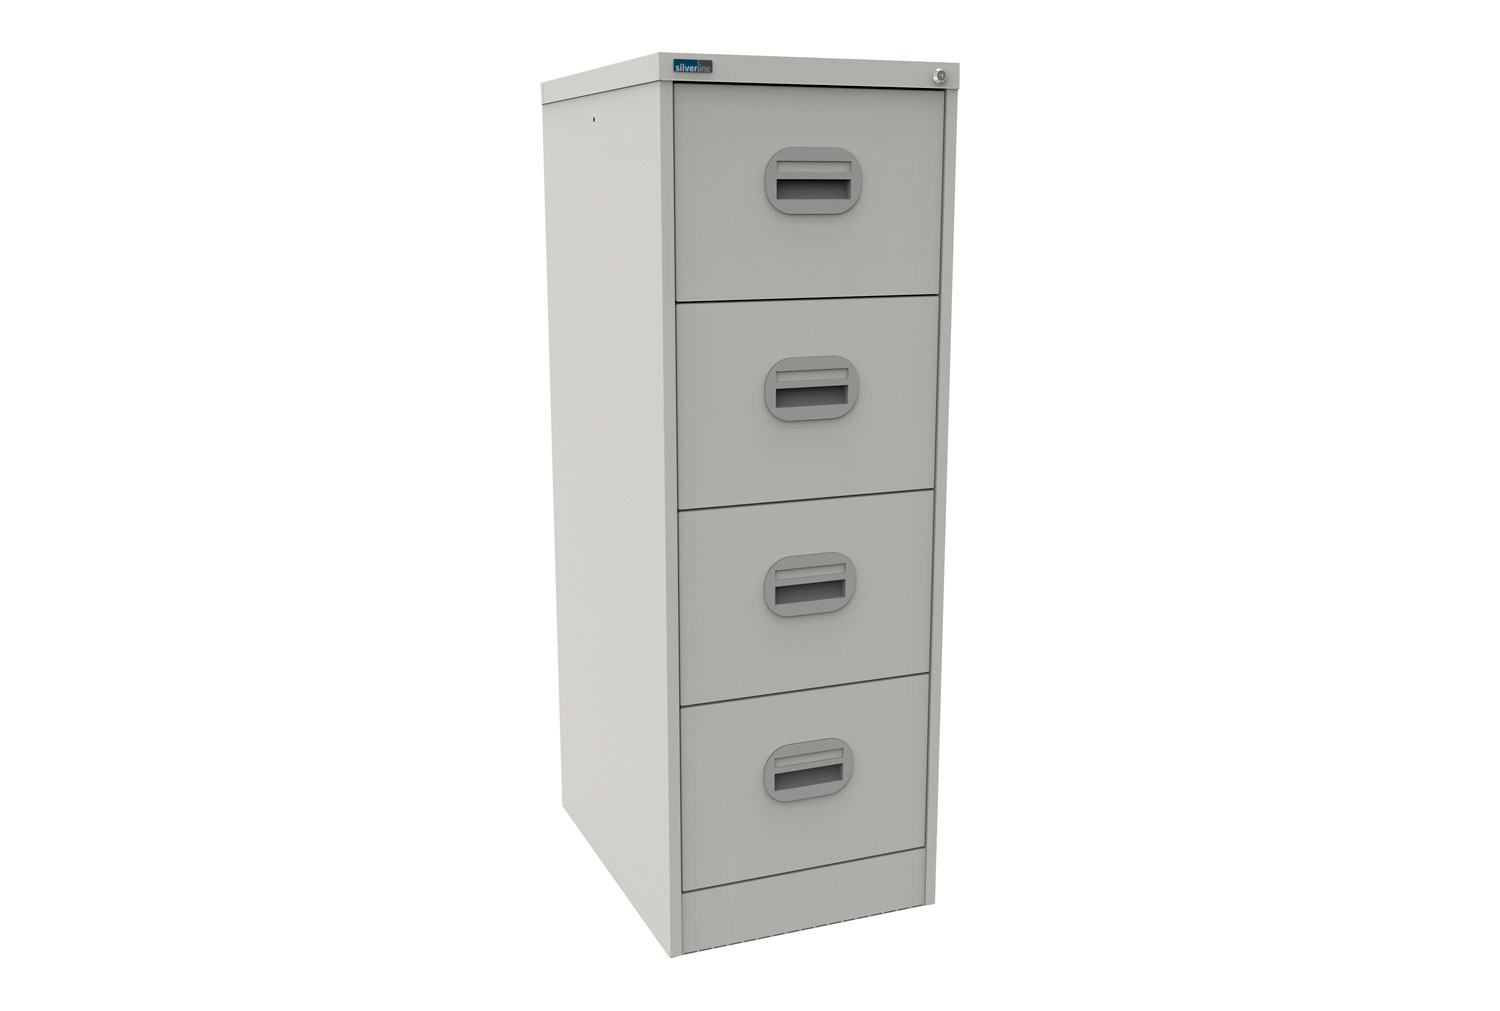 Silverline Kontrax 4 Drawer Filing Cabinet, 4 Drawer - 46wx62dx132h (cm), Traffic White, Express Delivery